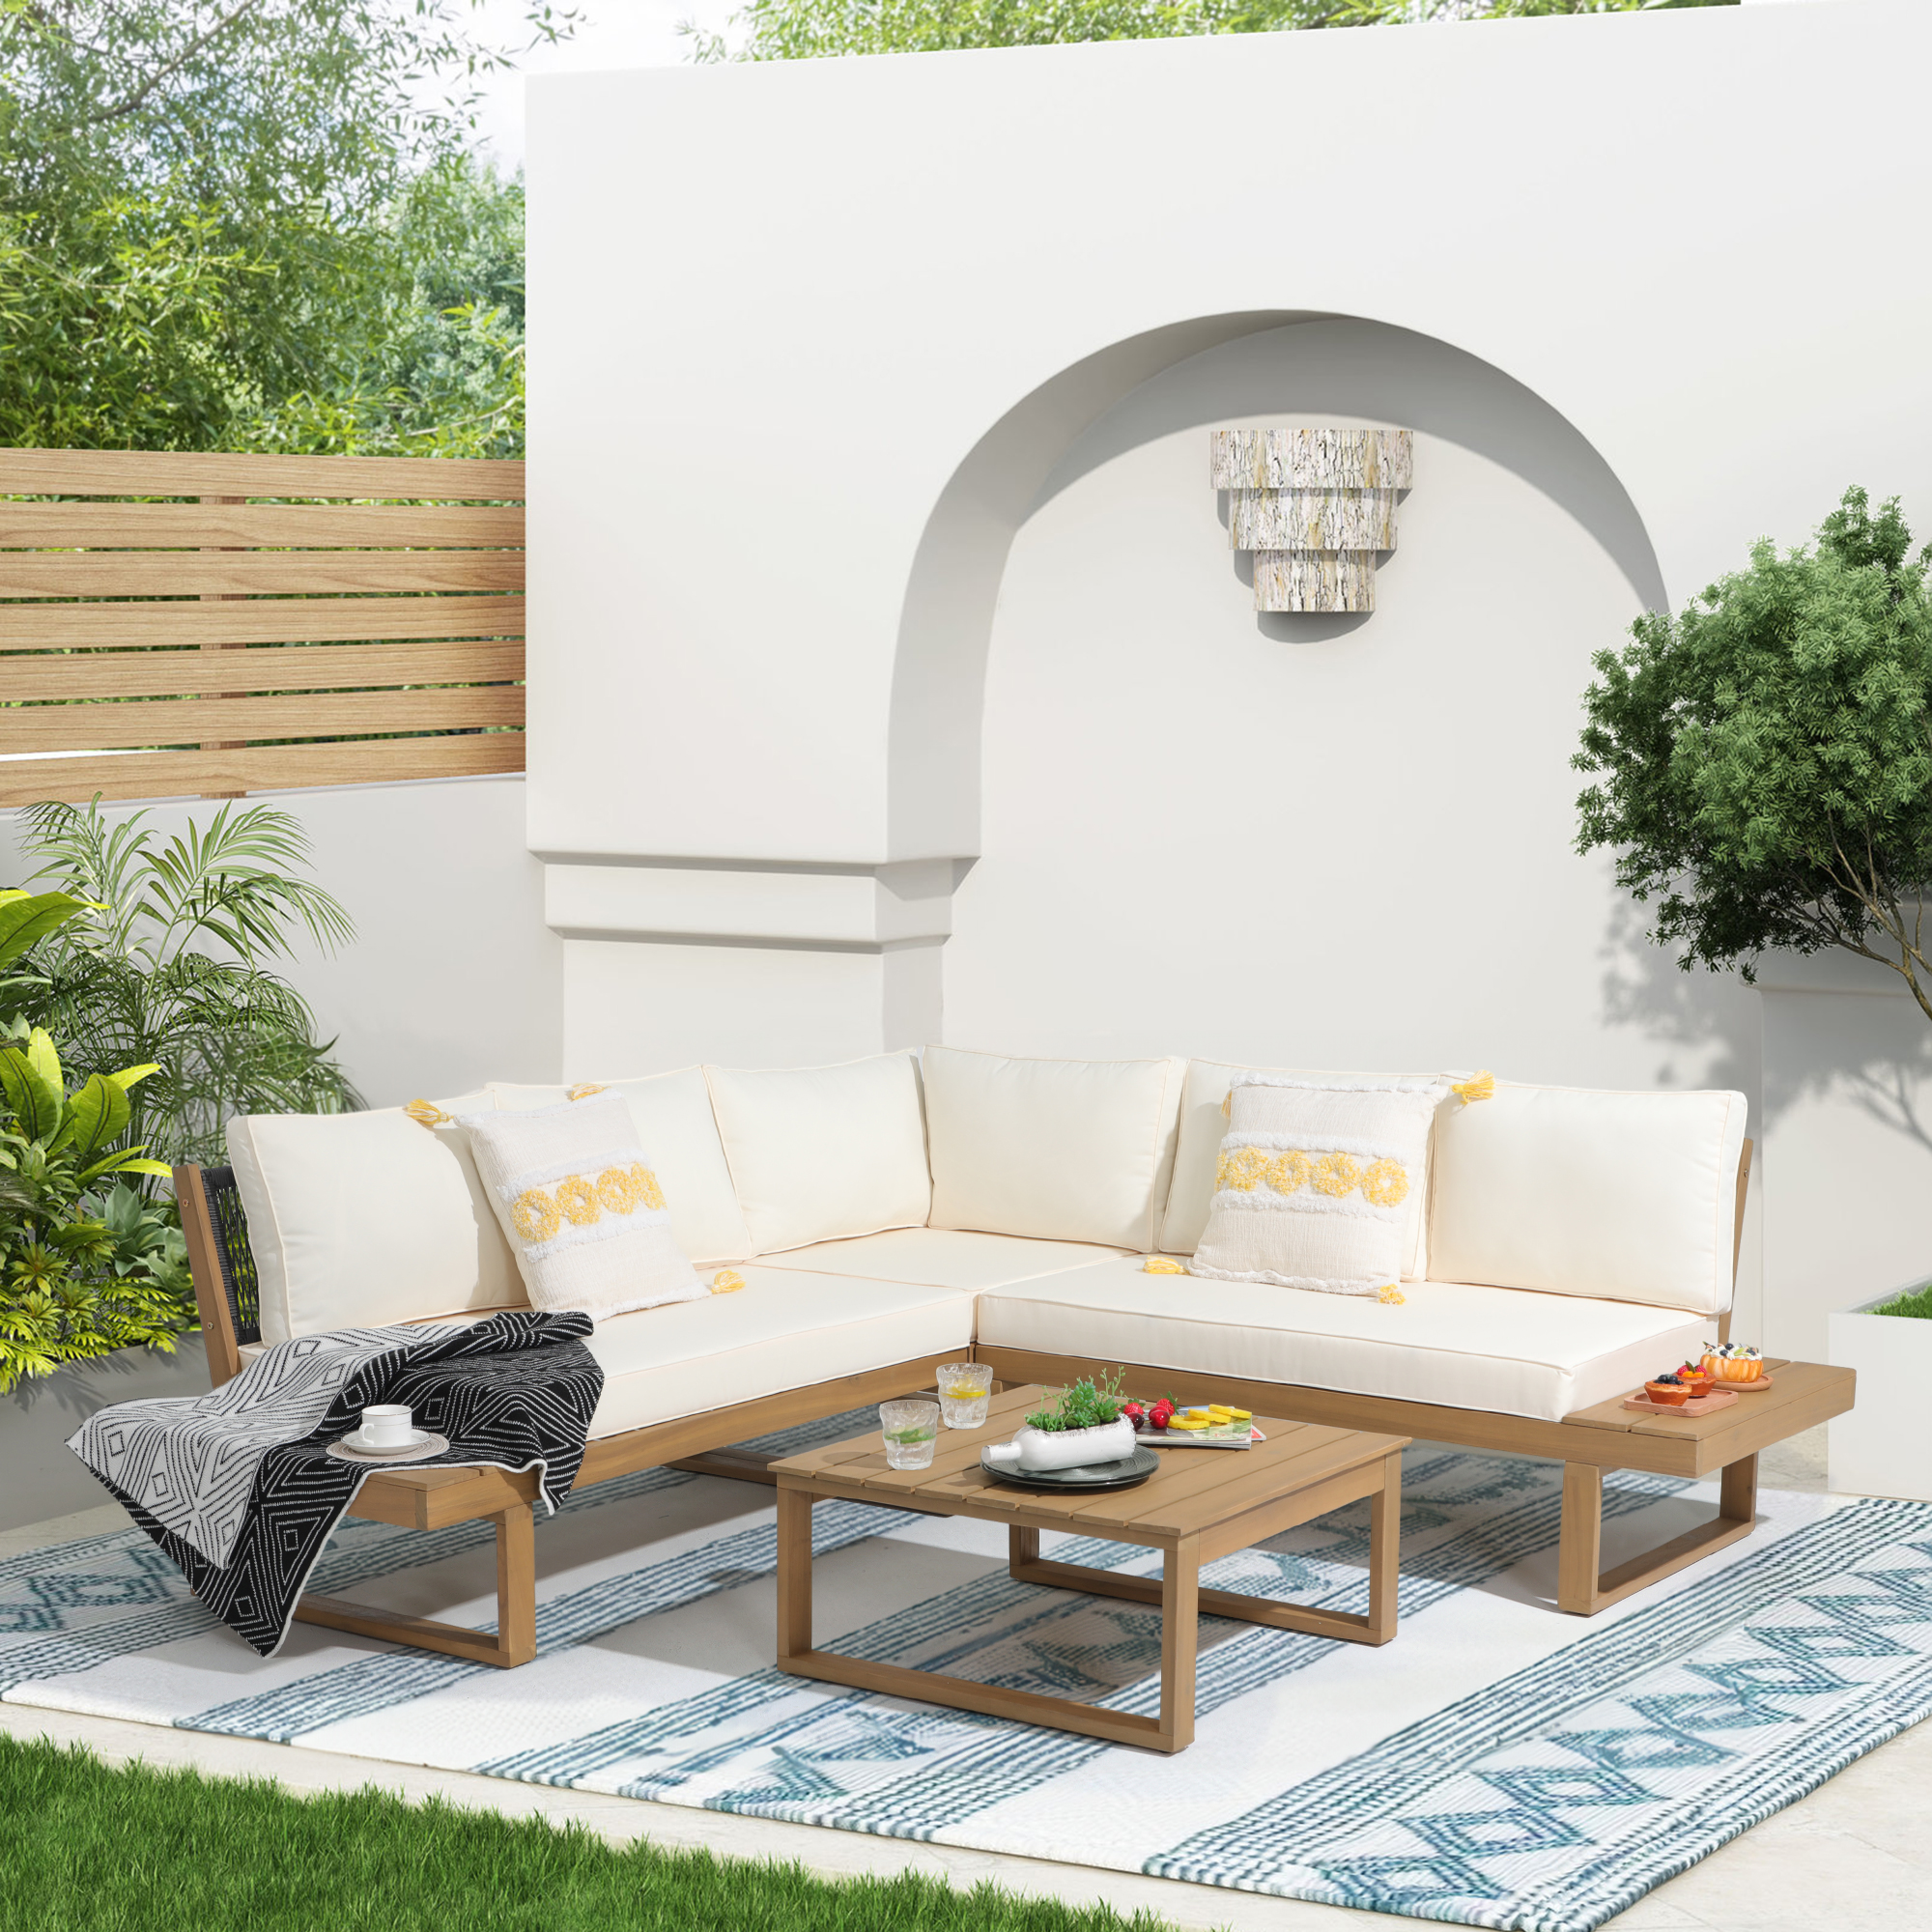 6 Seats Outdoor Sectional Set Teak Wood Patio Sectional Set with Cushions, 2 Colors.